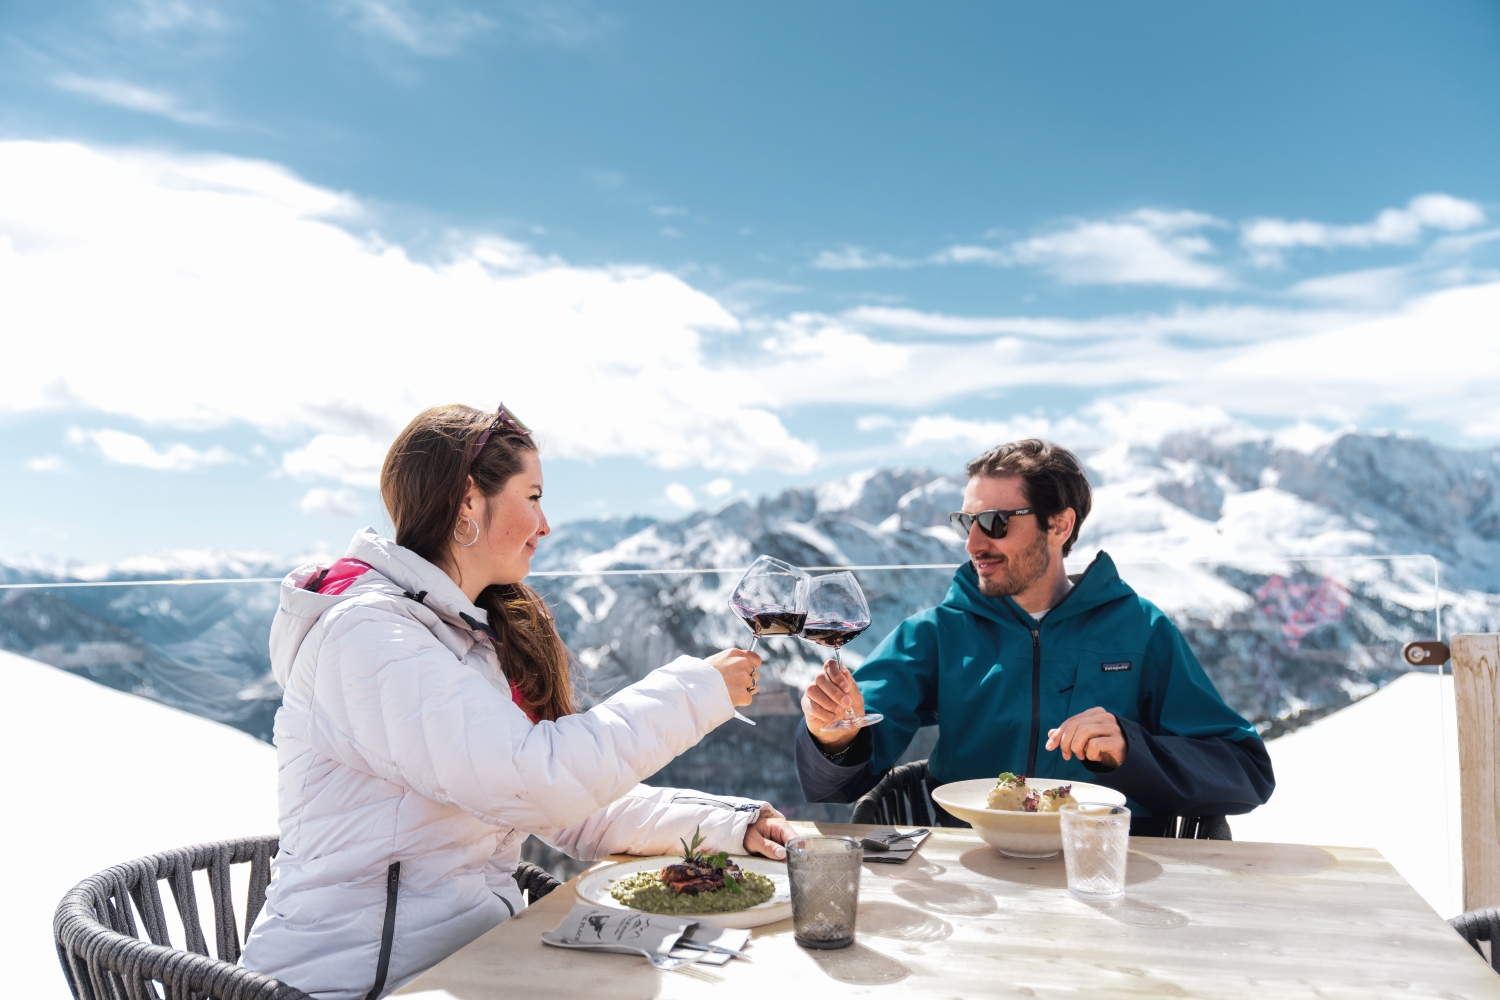 Couple eating meal with snow scene background, Val di Fassa